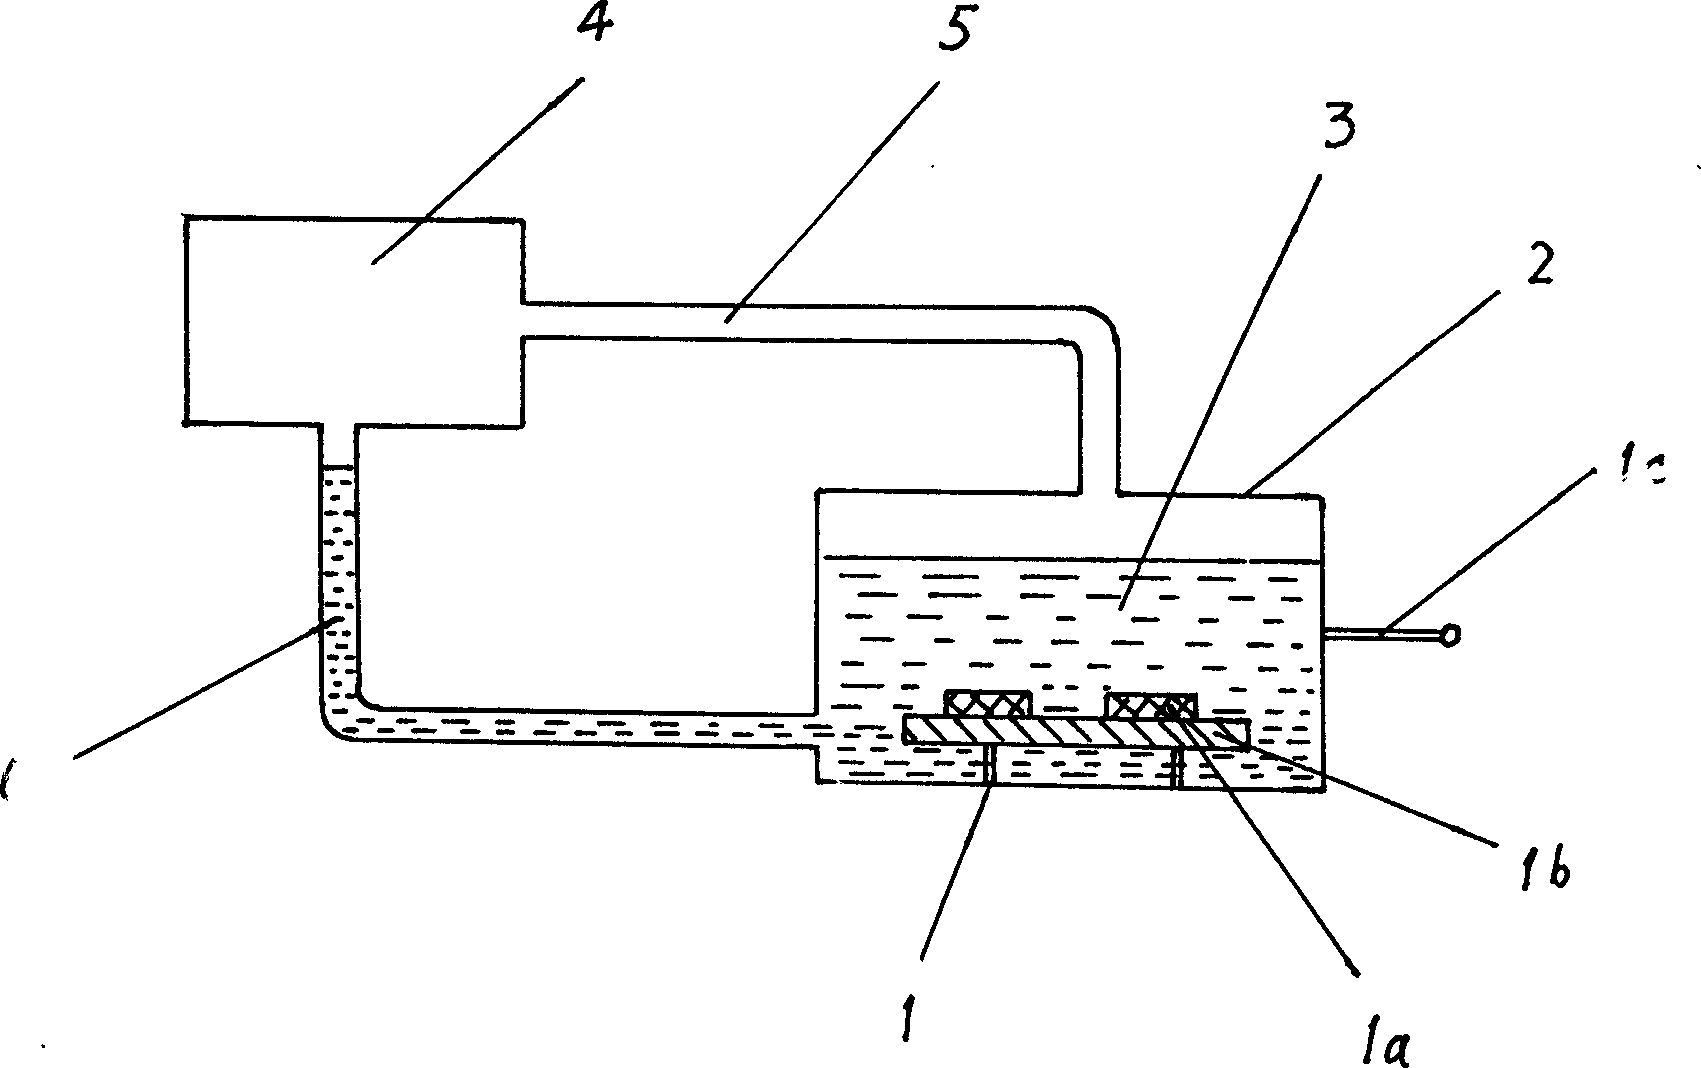 Active evaporating radiation tech of power semiconductor device or modular